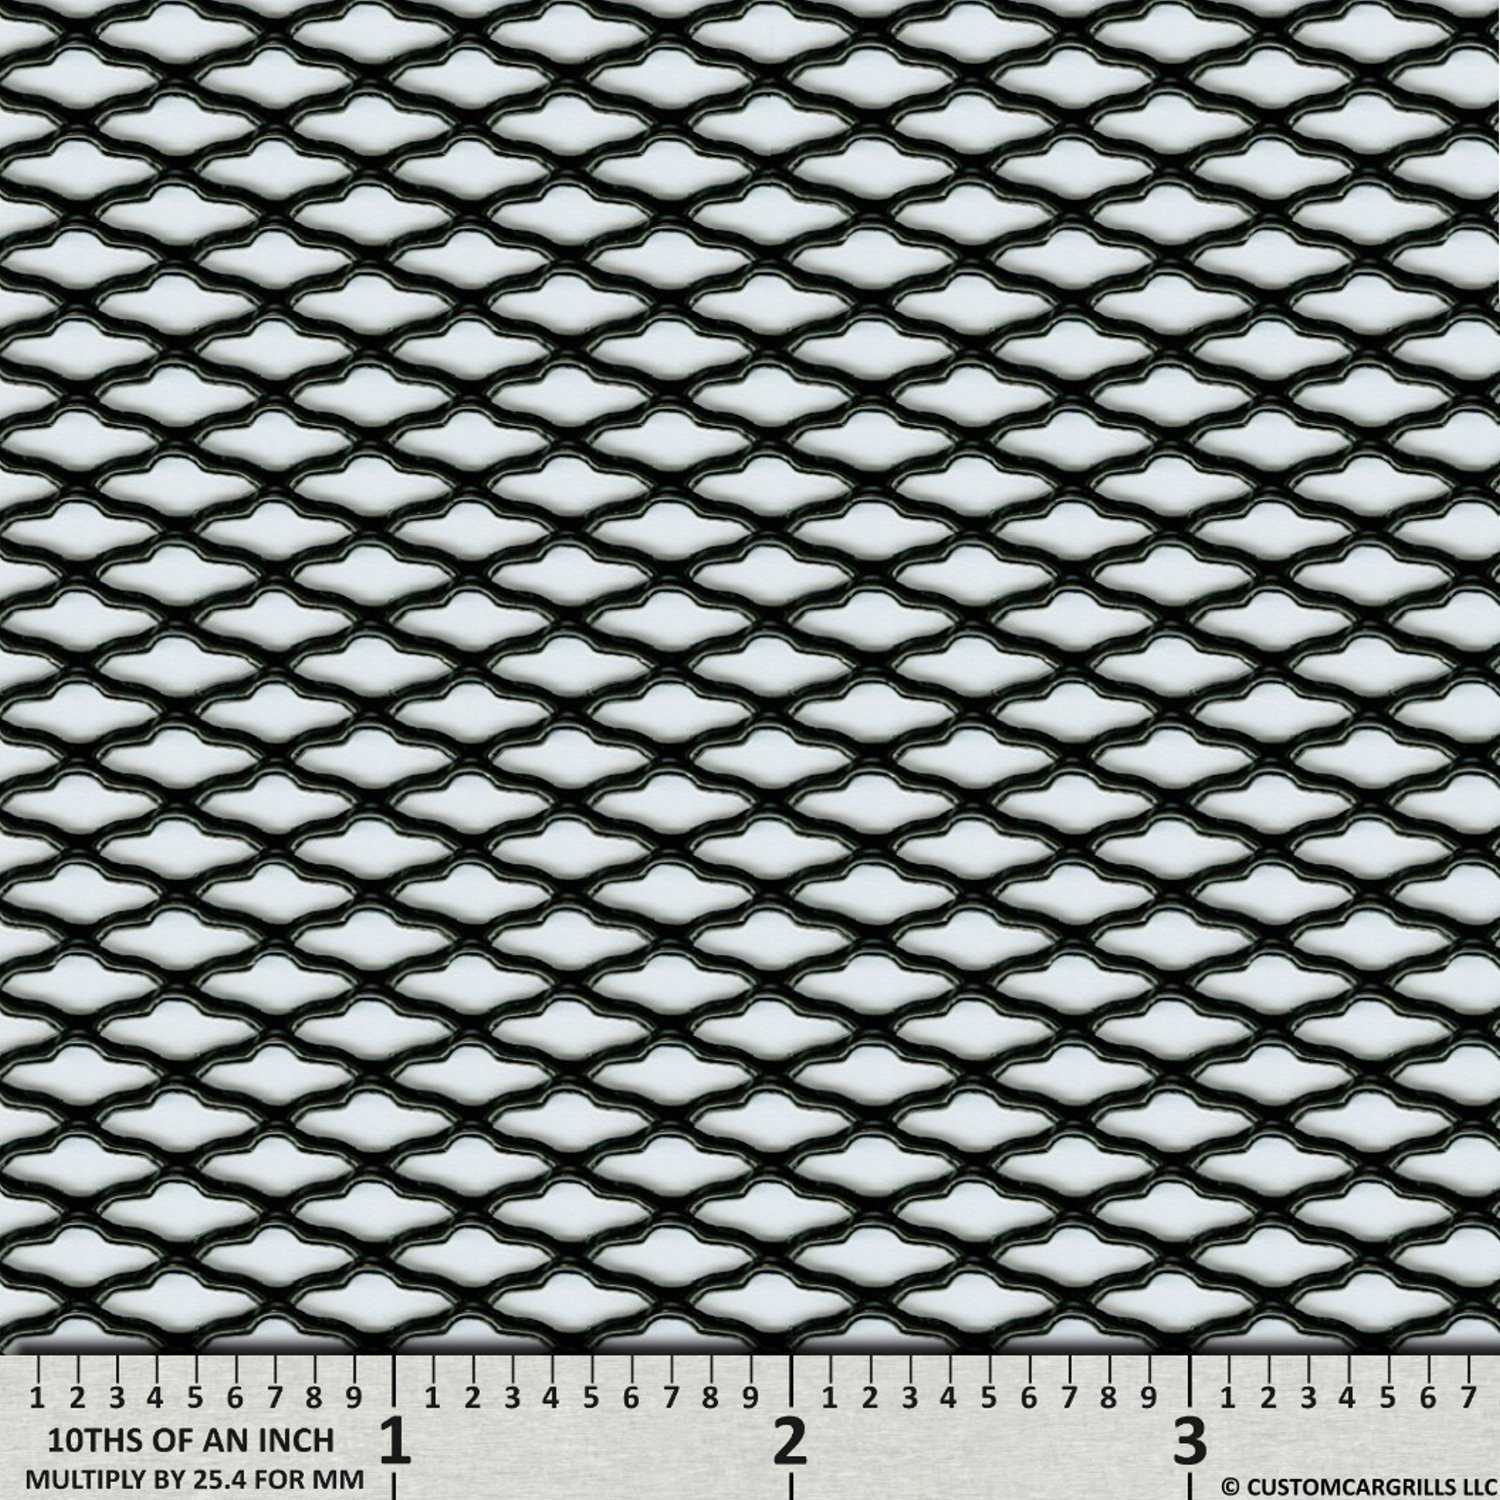 12in. x 48in. Oval ZigZag Grill Mesh Sheet - Gloss Black #1